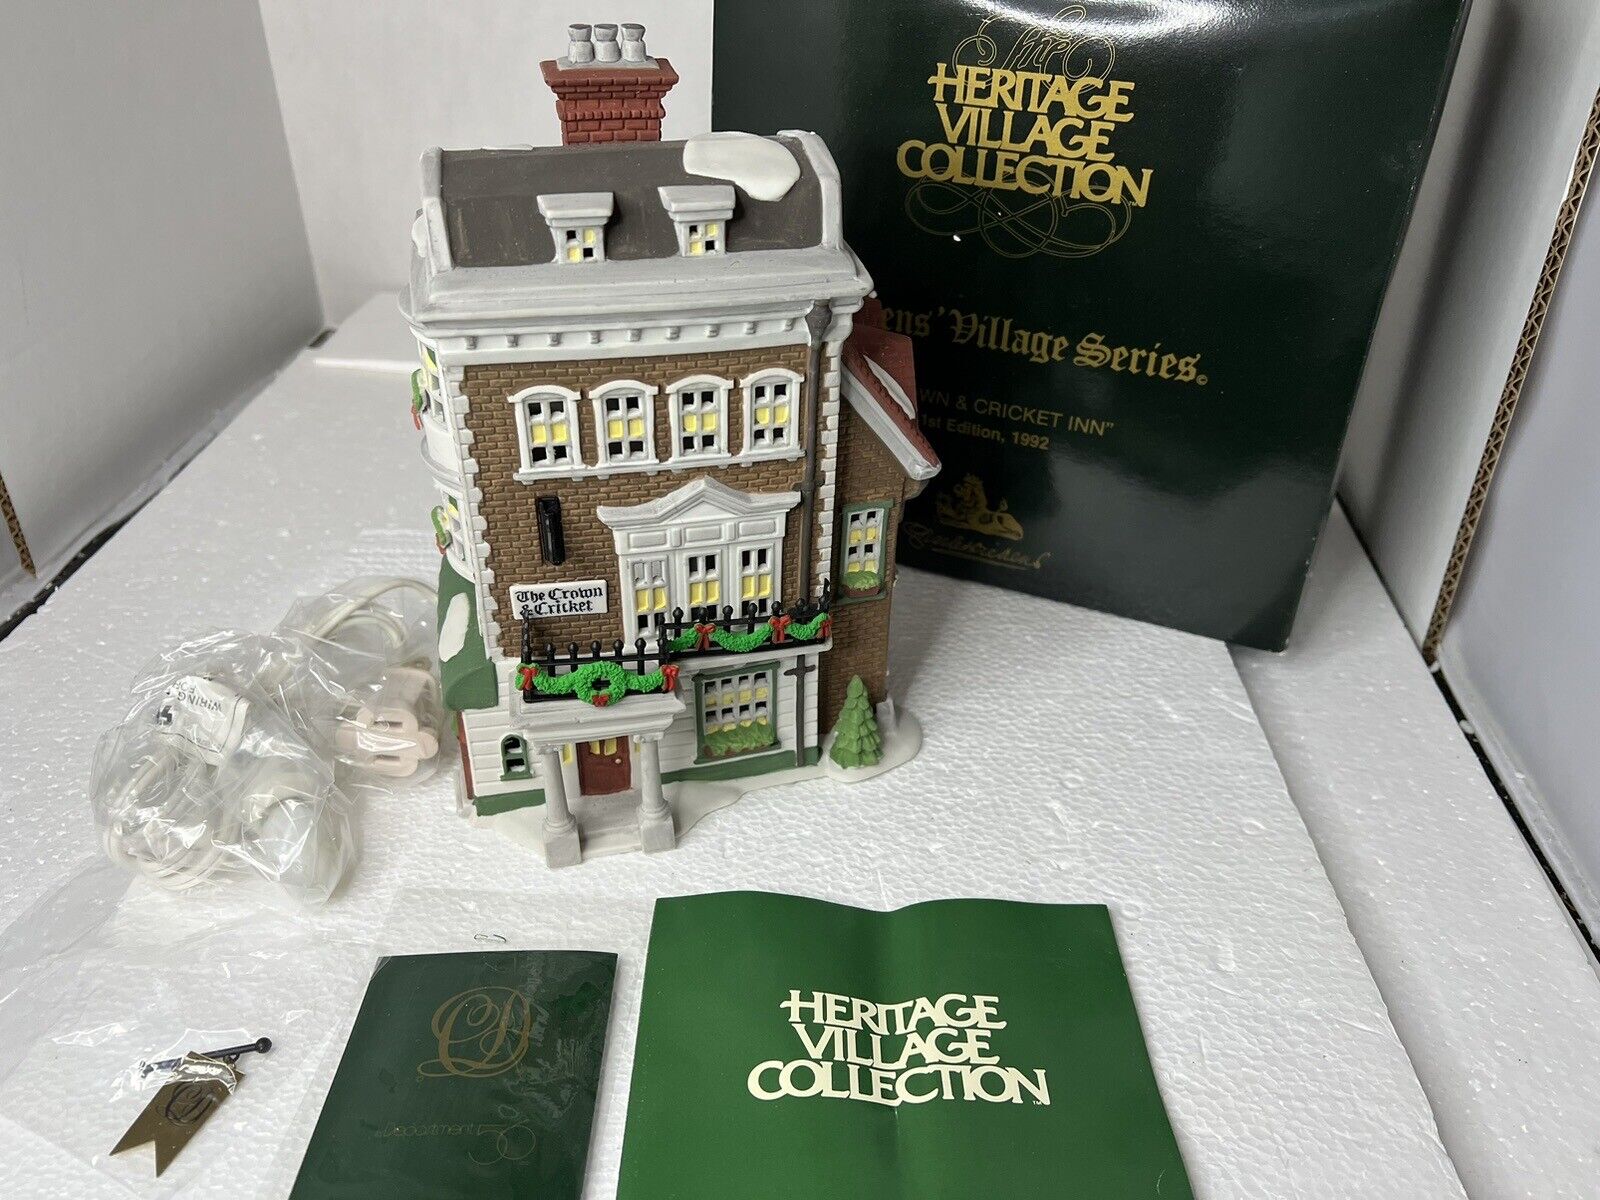 Dept. 56 Dickens Village Series “Crown And Cricket Inn” 1st Edition Limited